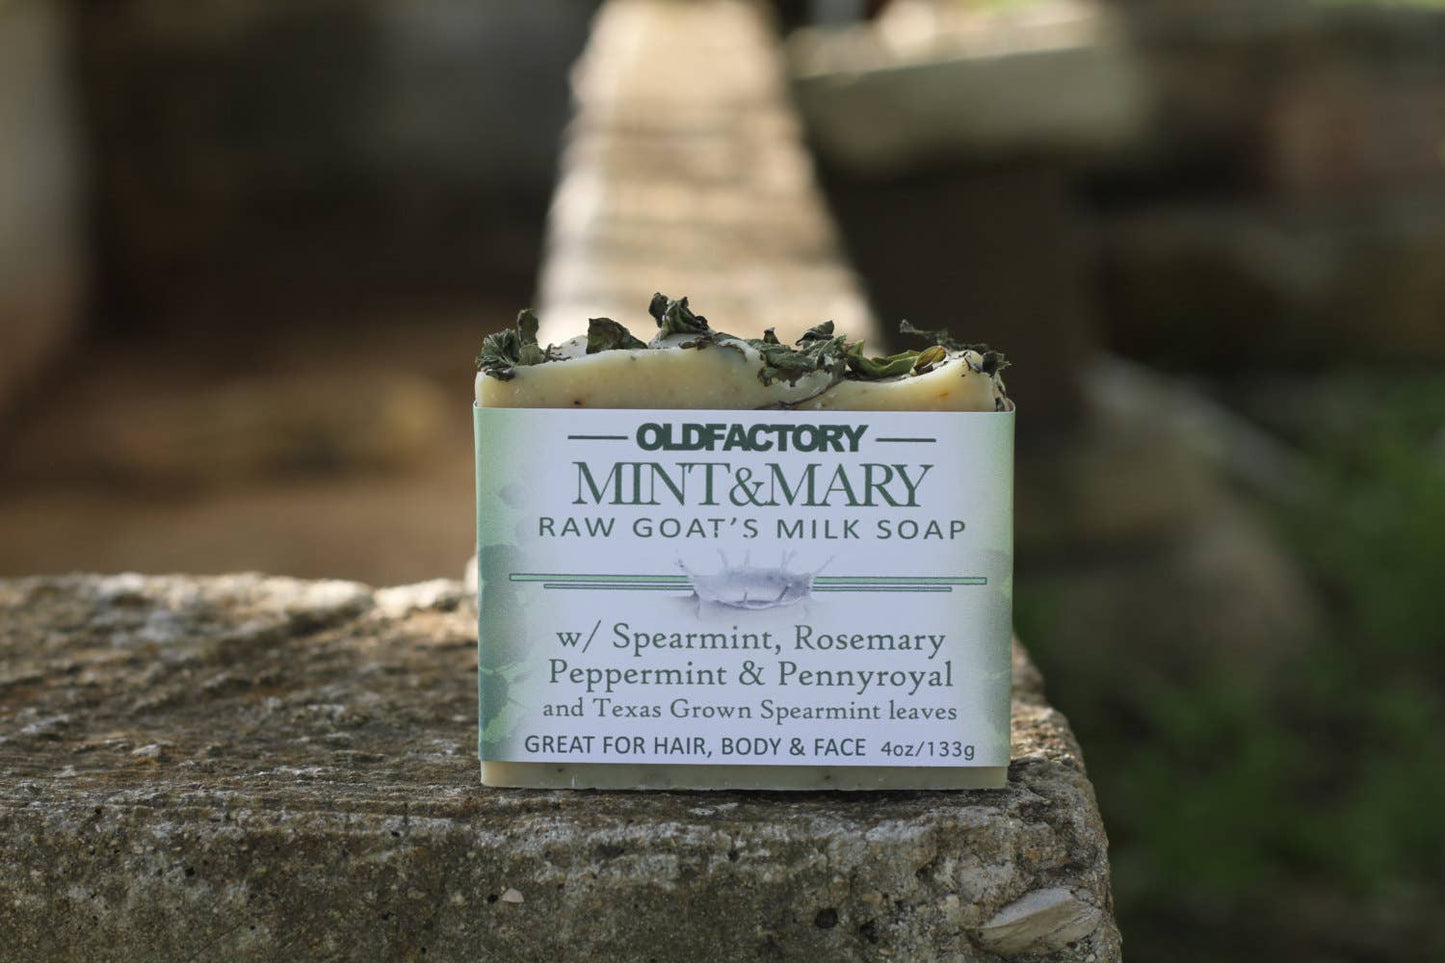 Old Factory Soap + Parousia Perfumes - Mint & Mary Goats Milk Soap - with Peppermint, Spearmint, +